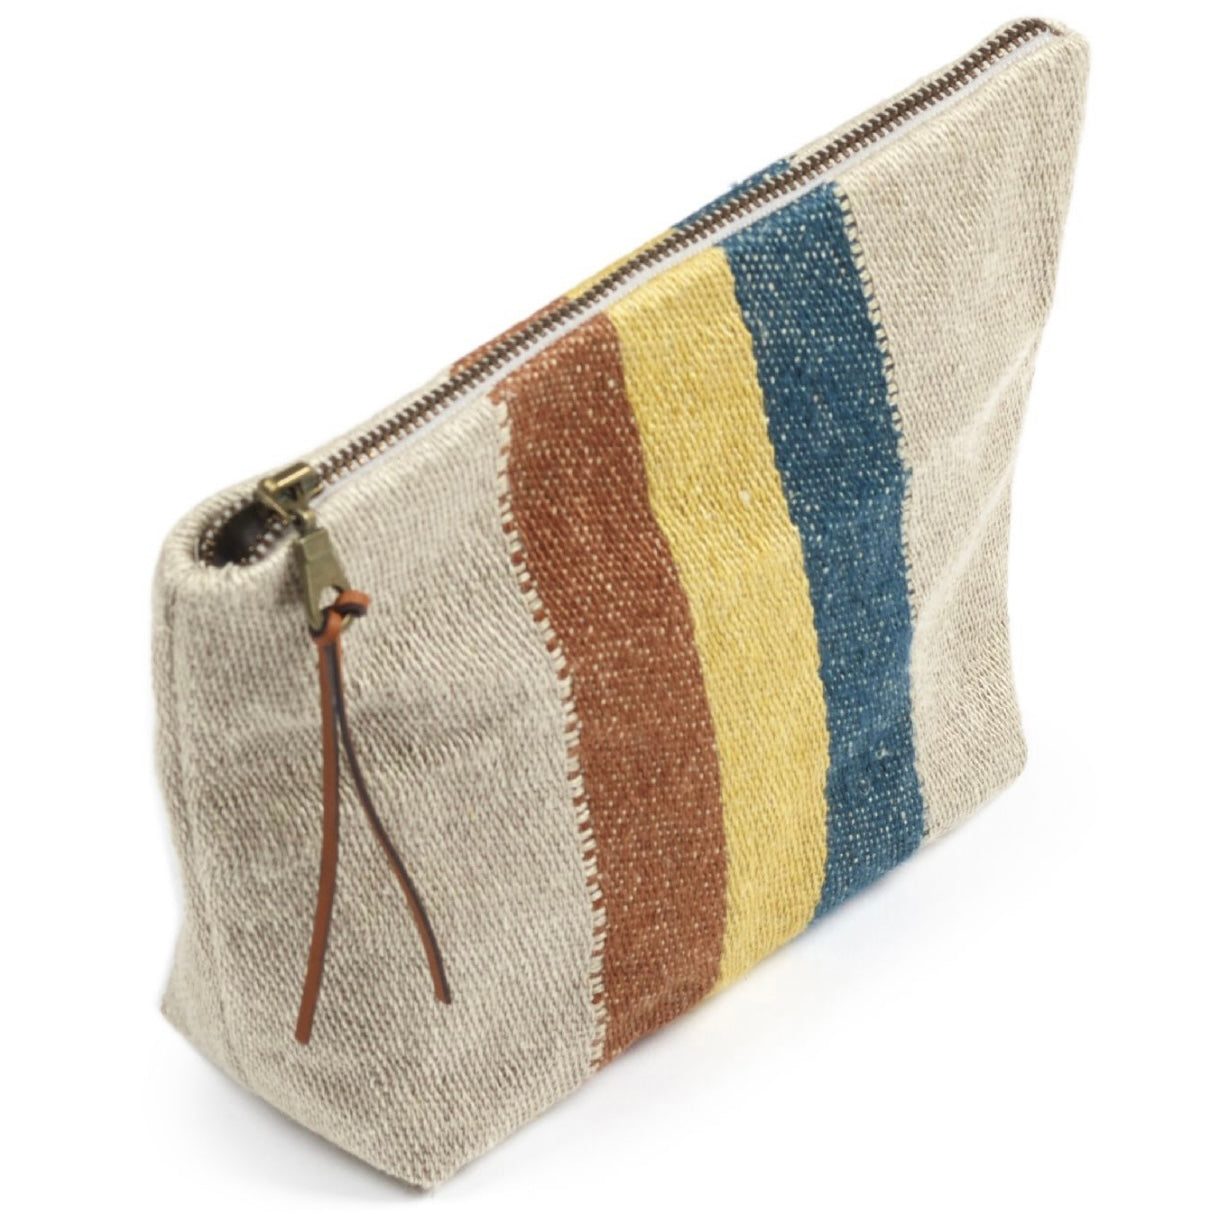 The Belgian Towel Pouch - 2 colors available!